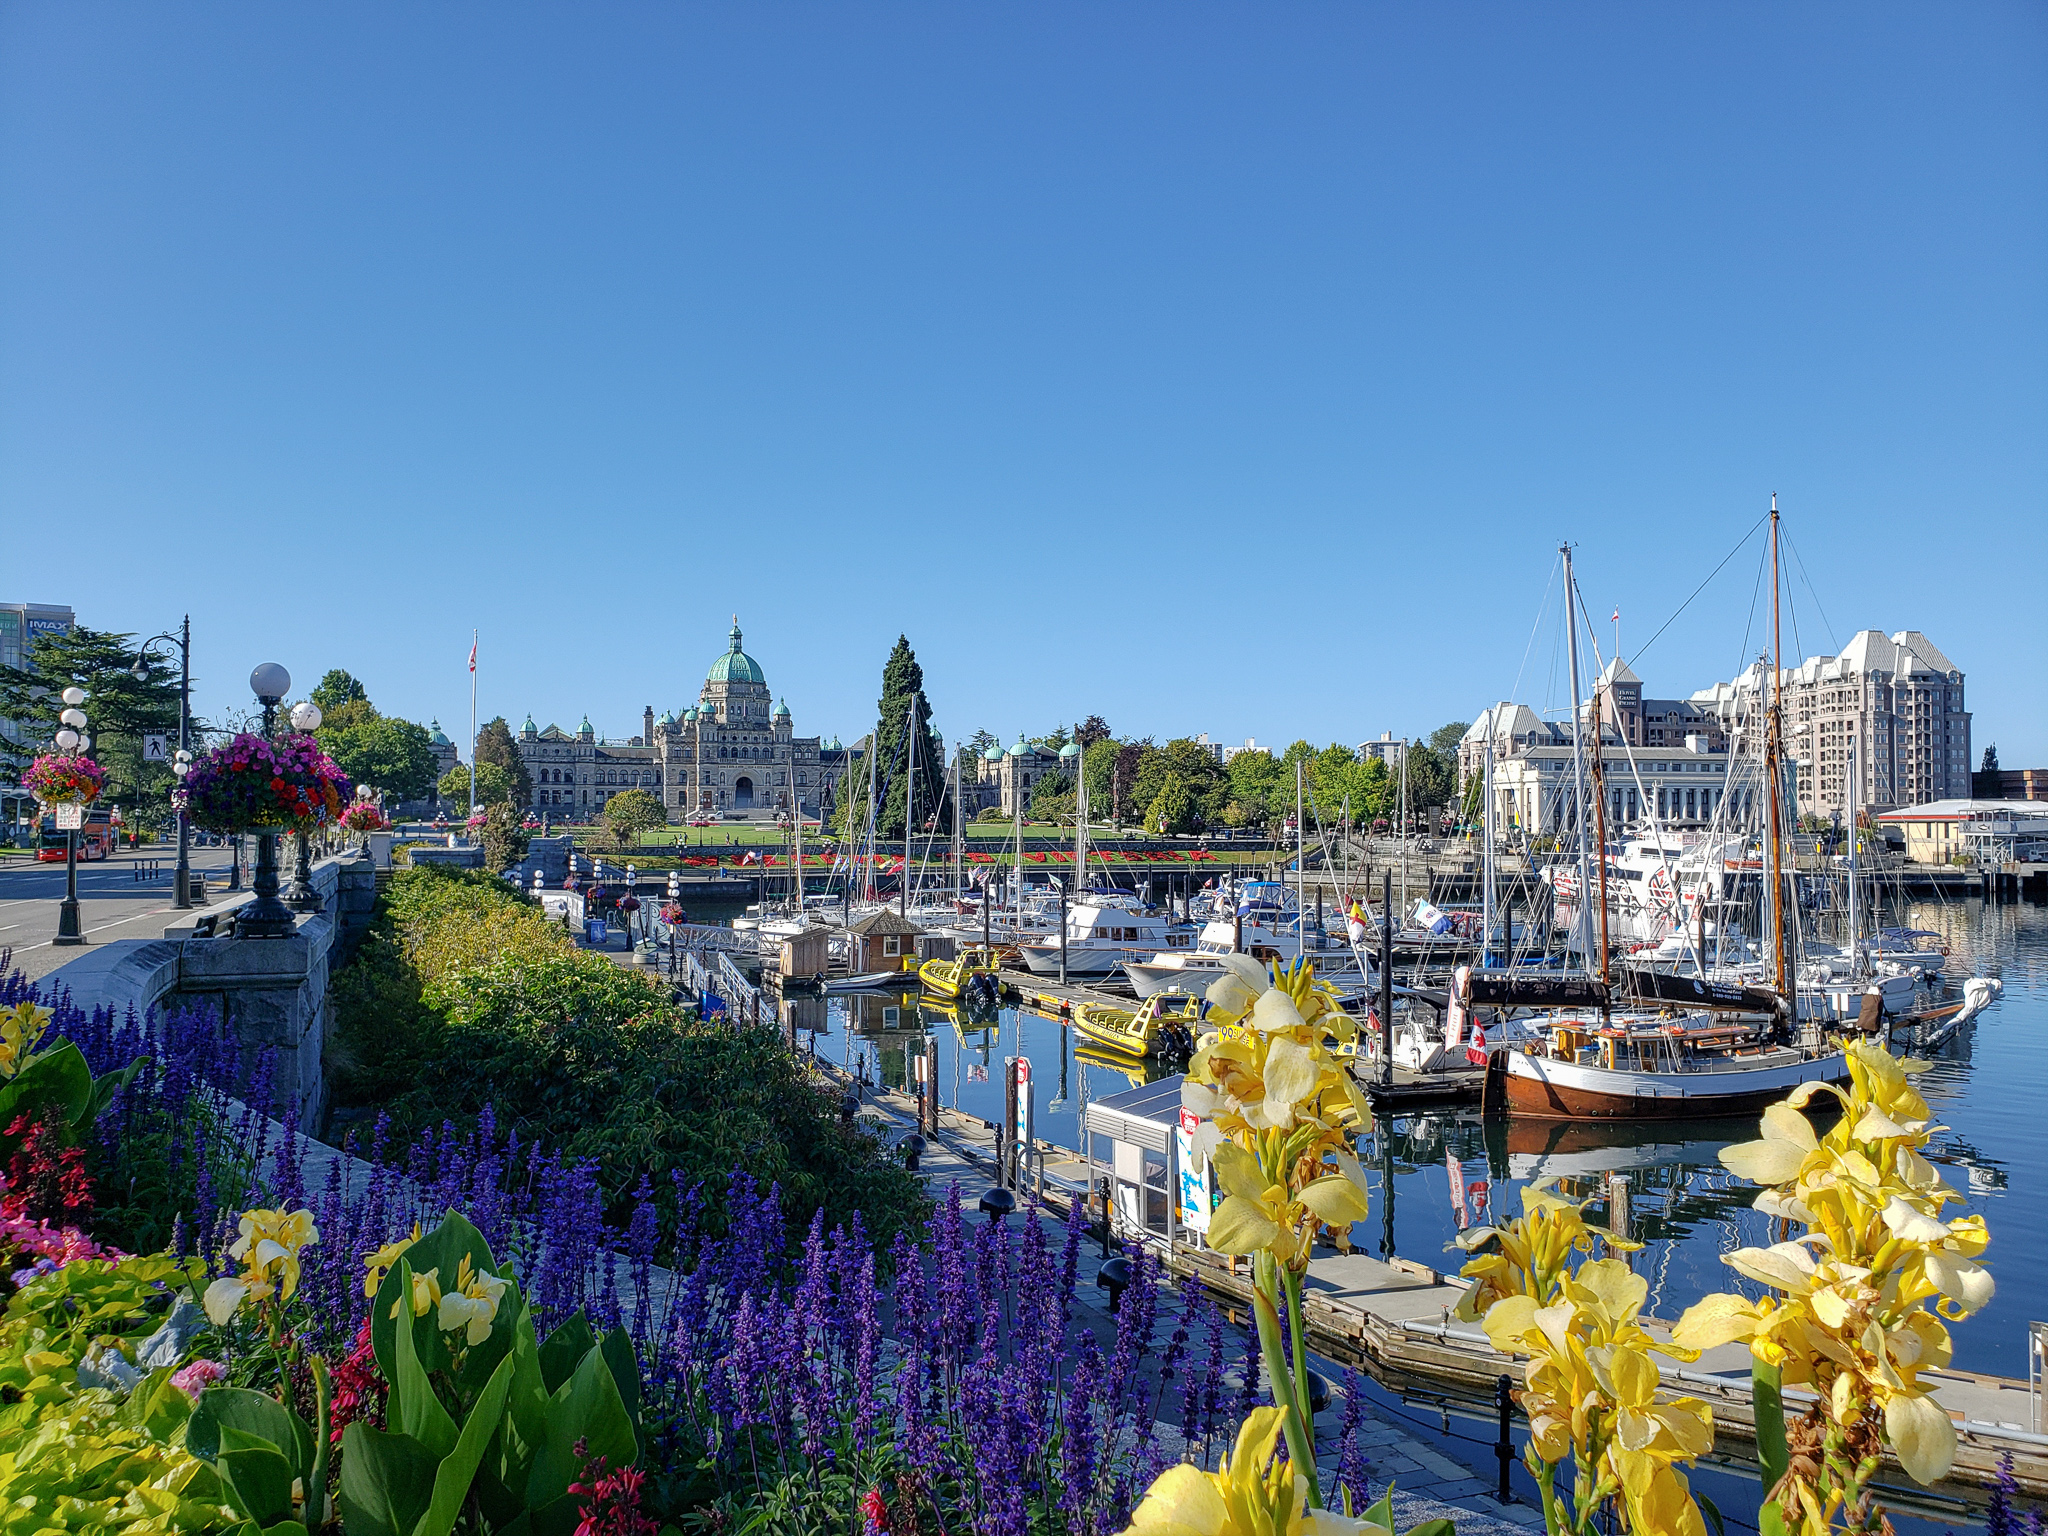 royal heights tours victoria bc